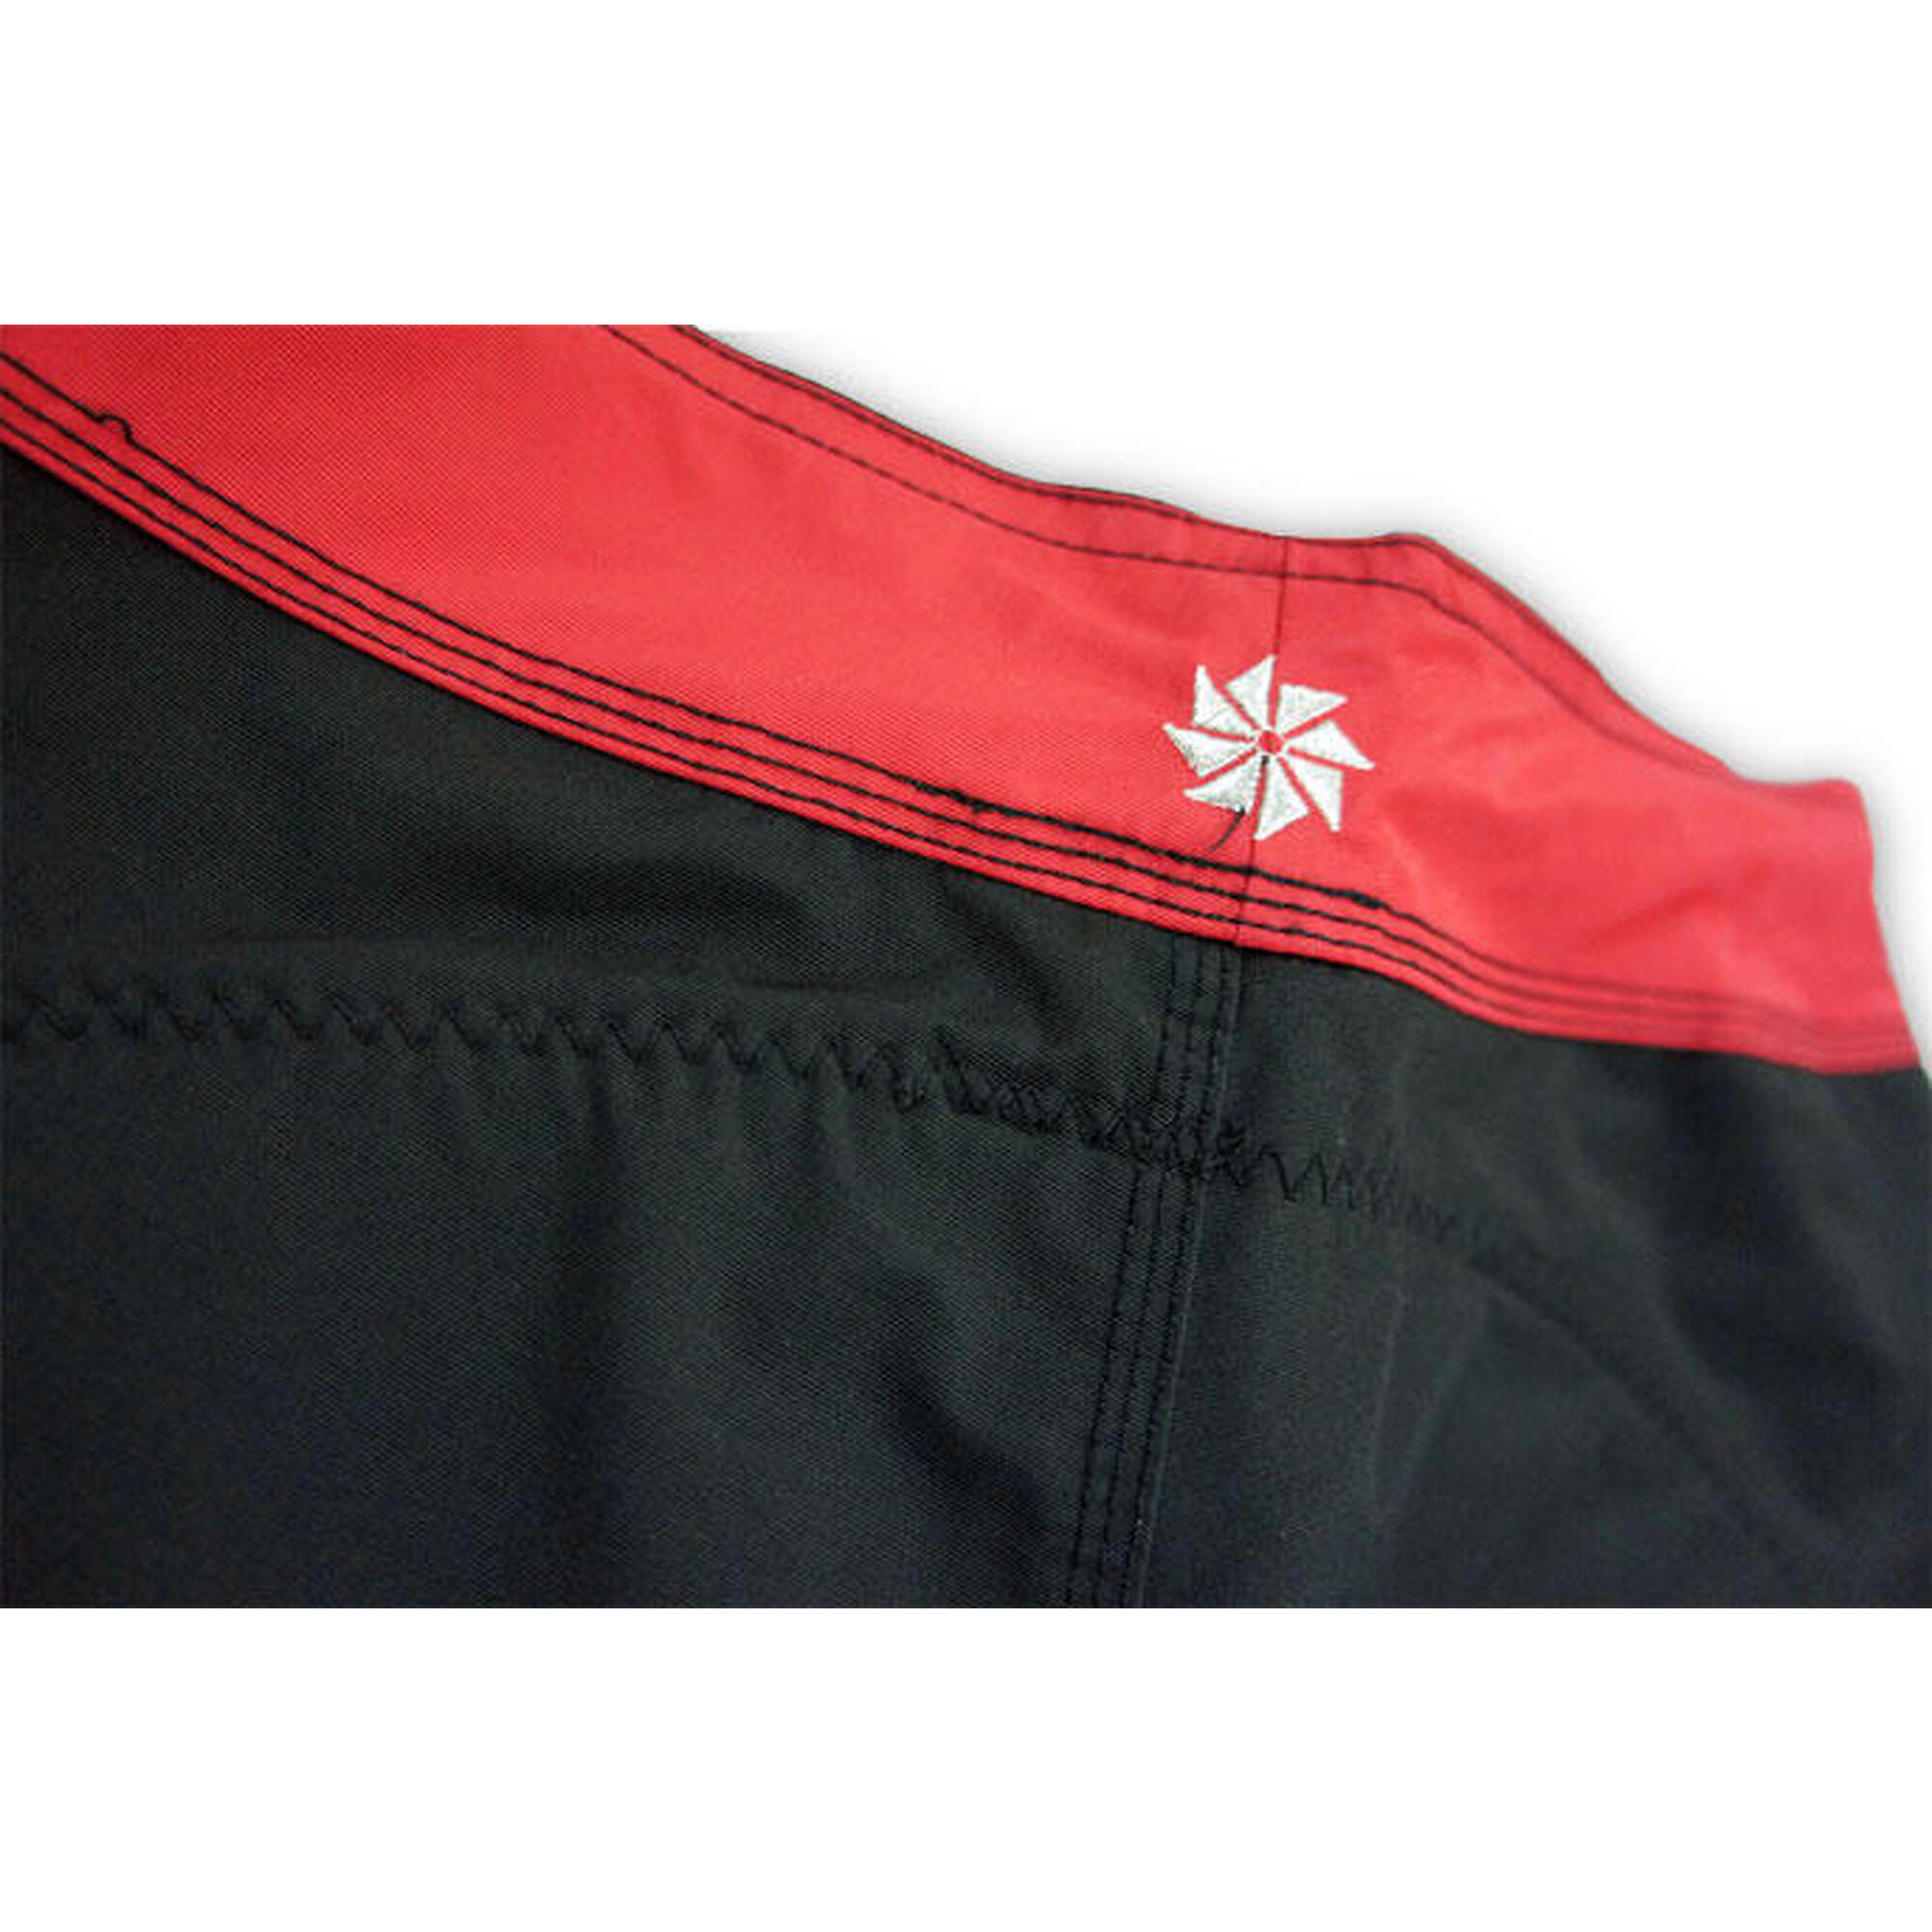 Women's dragon boat padded shorts - red